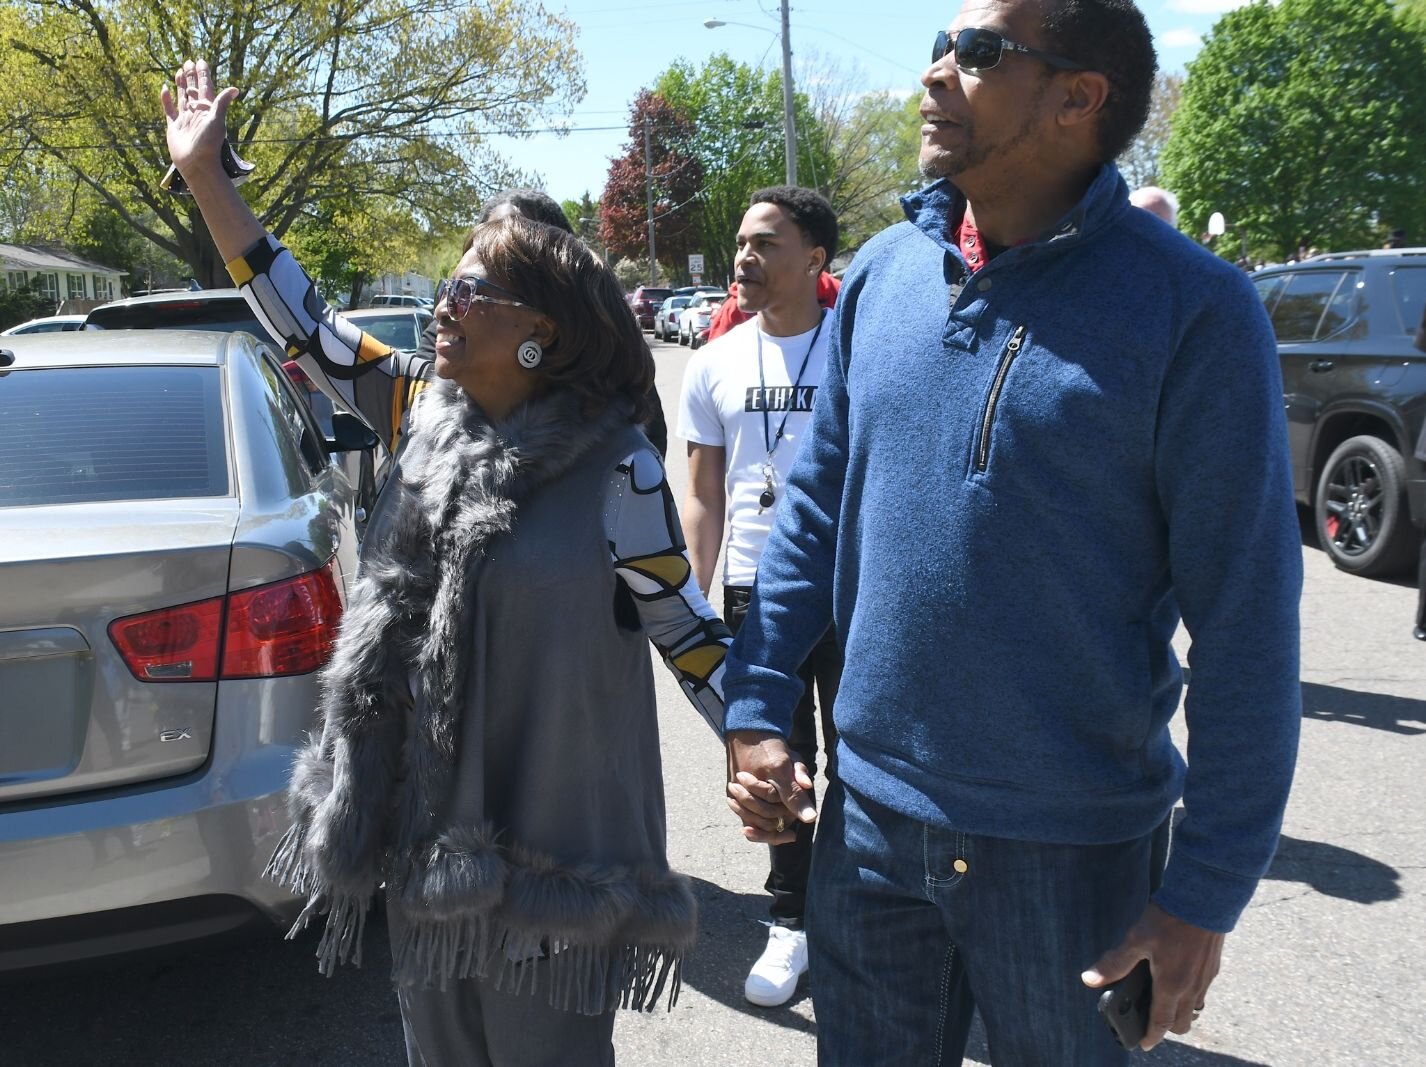 Johnny Bristol, Jr., holds hands with his mom Maude Bristol- Perry as they walk toward the street sign of Honorary Mayor Maude Bristol-Perry Avenue.